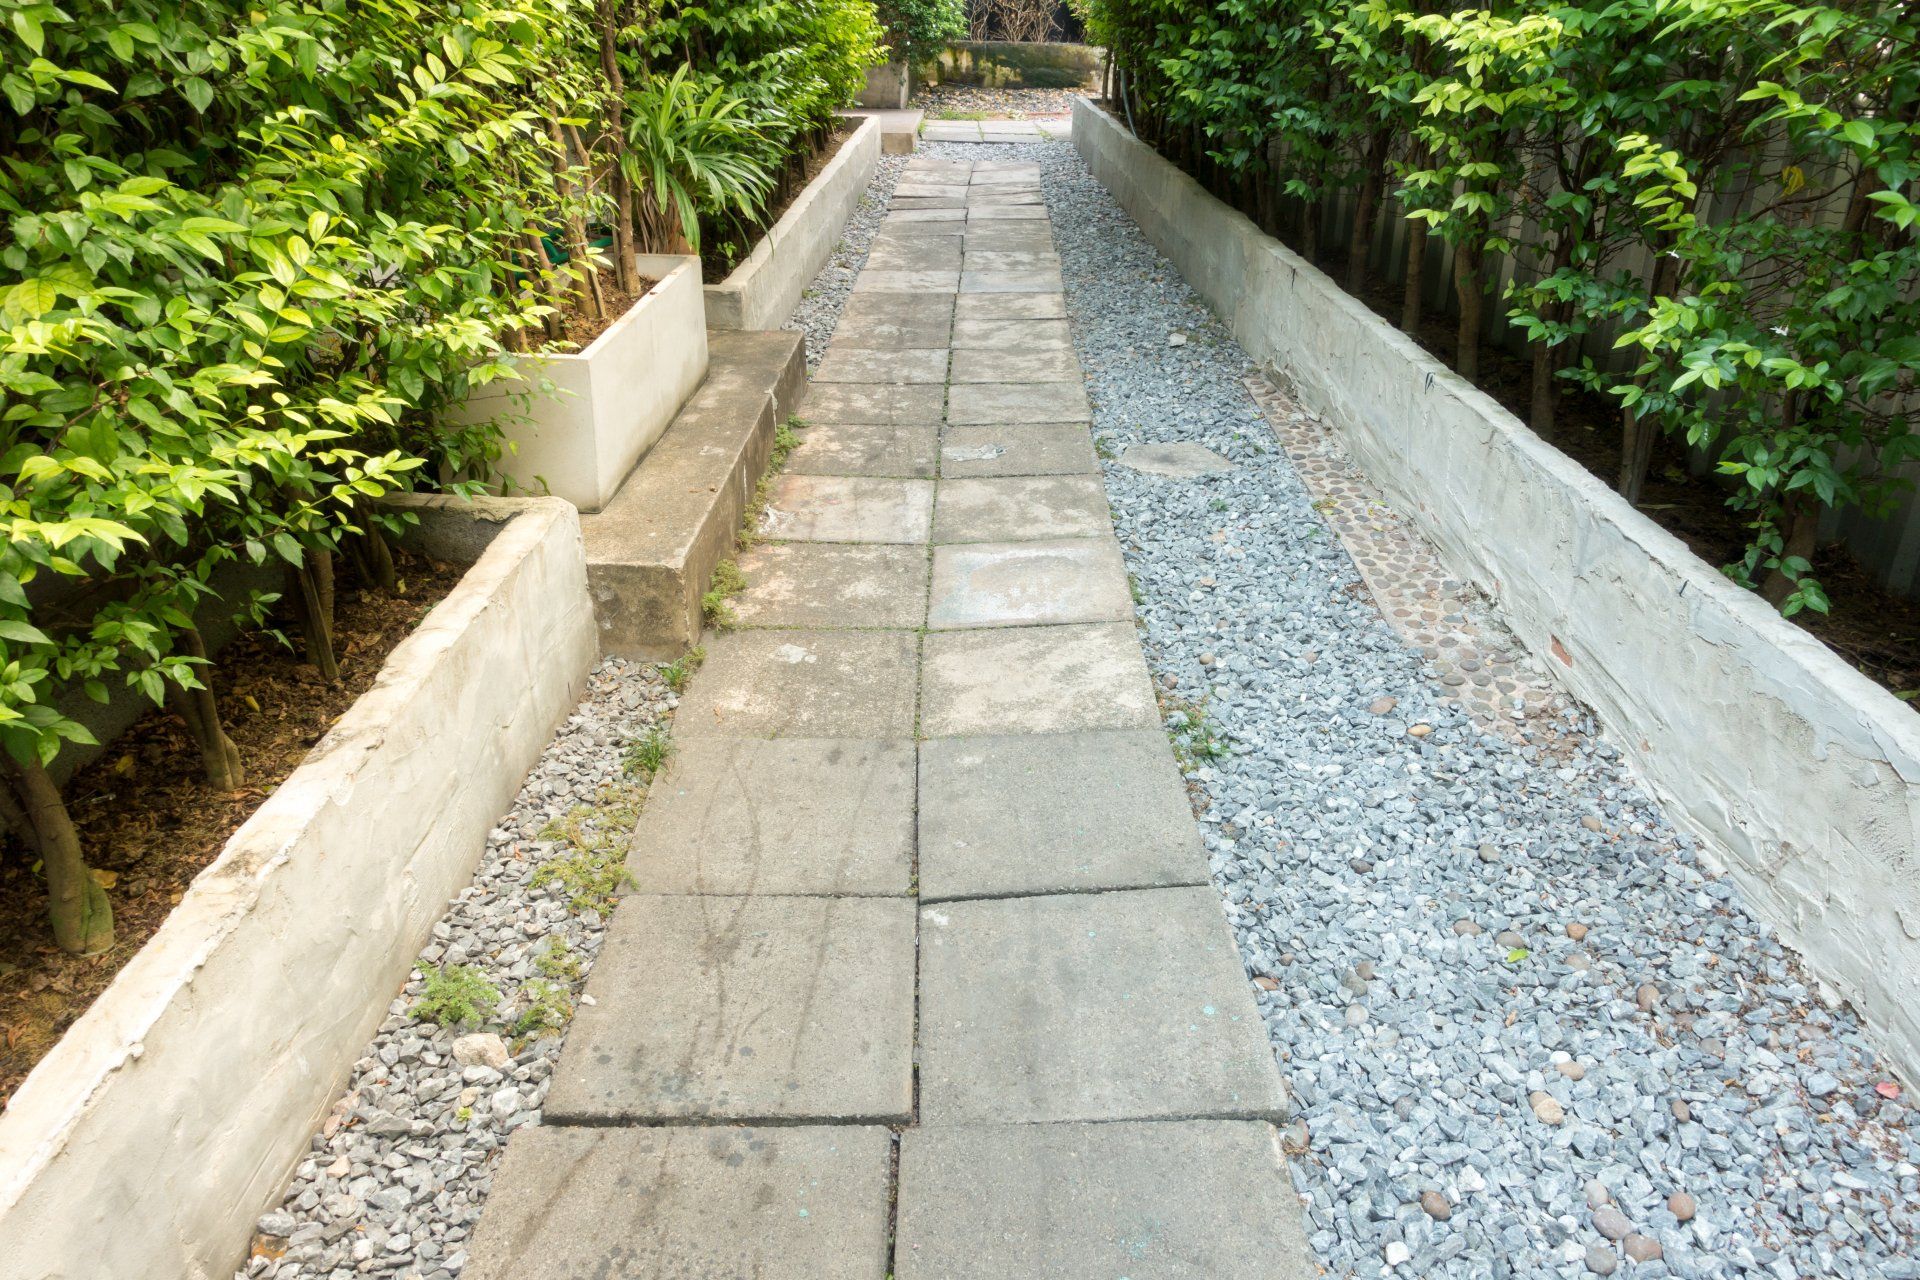 A hardscaped path between to raised bed garden beds